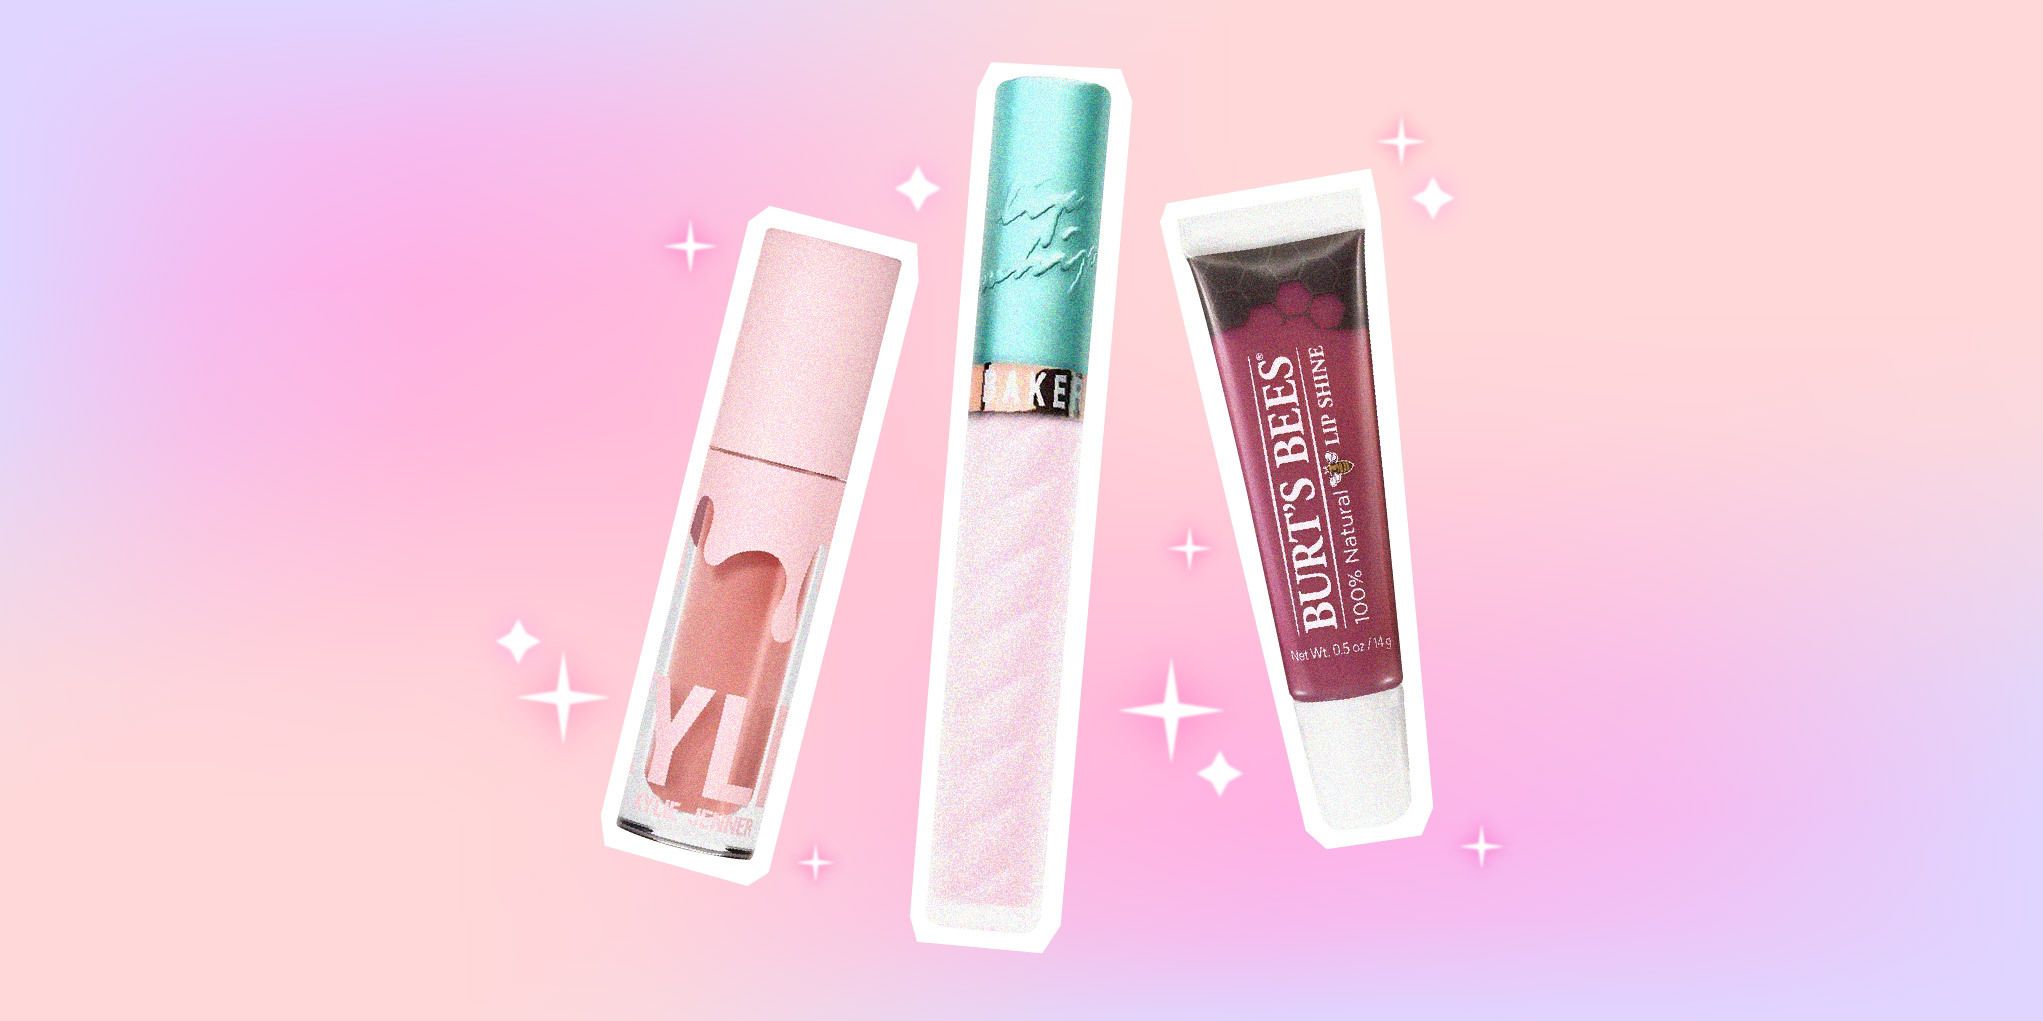 The 17 Best Lip Glosses of 2022 - Top Non-Sticky Lip Glosses to Try